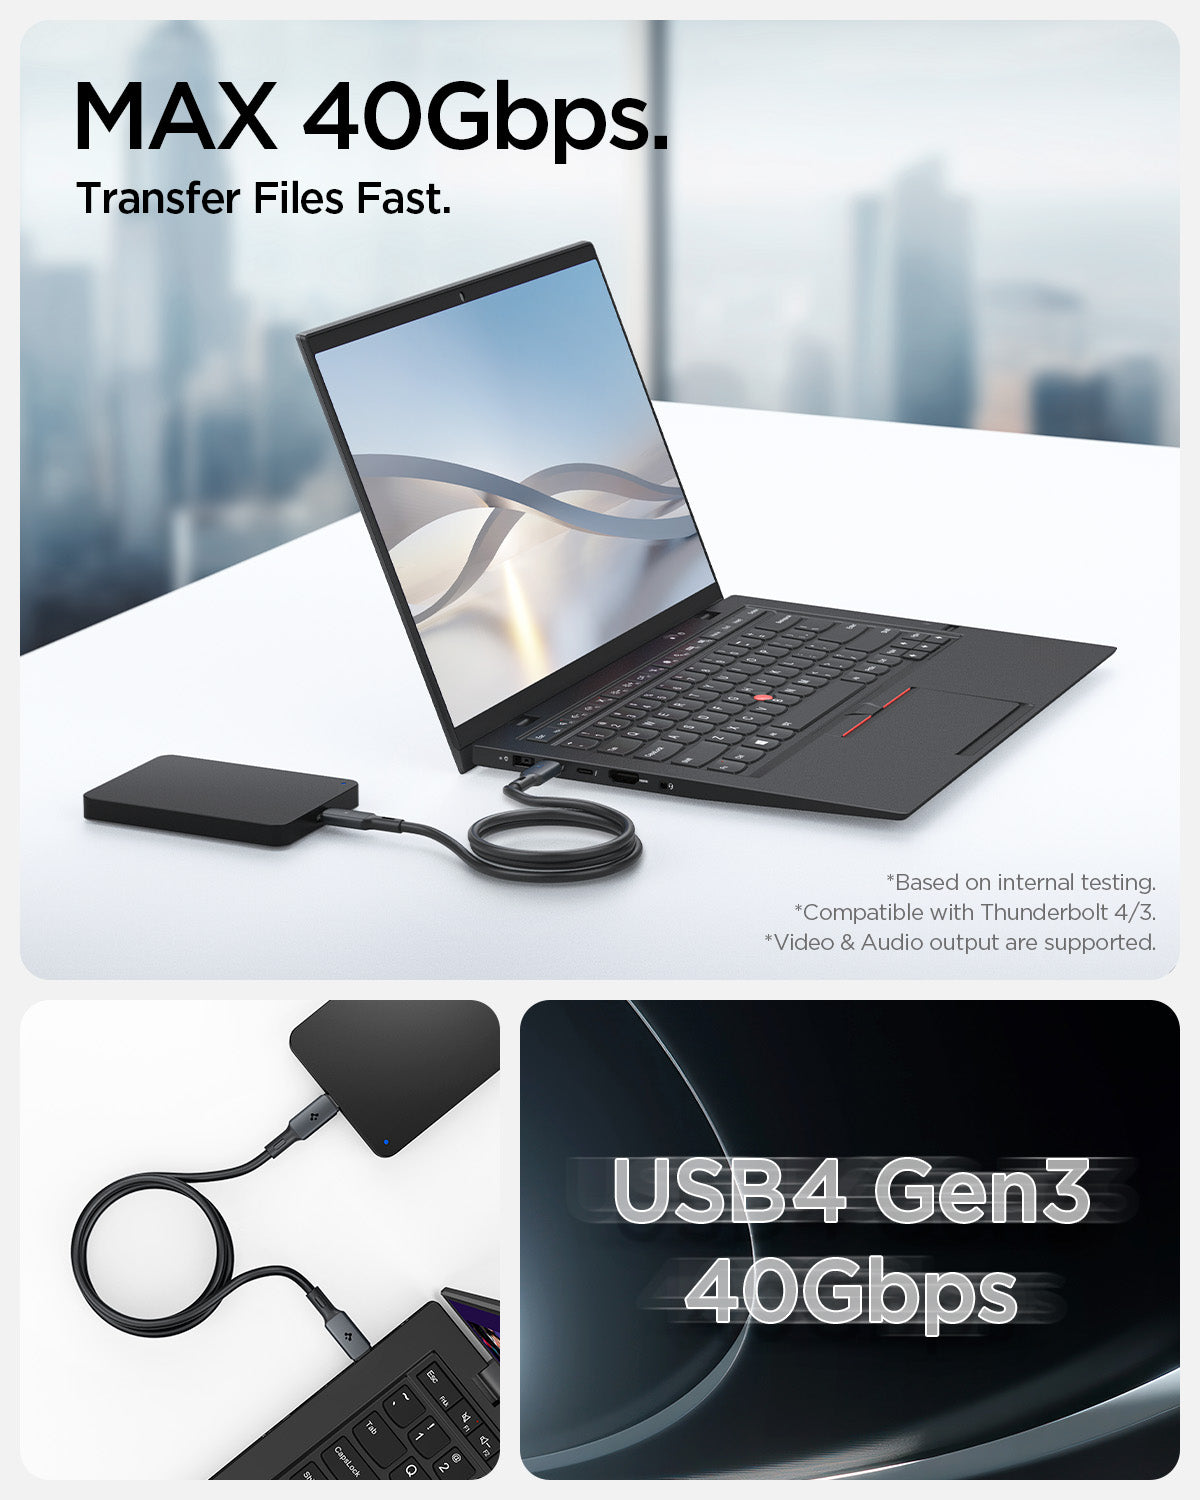 ACA06840 - ArcWire™ USB-C to USB-C Cable PB2203 in Black showing the Max 40Gbps. Transfer Files Fast. USB4 Gen3 40Gbps. Showing devices on attached to a power bank with a charging cable. Base on internal testing. Compatible with Thunderbolt 4/3, Videos, Audio output are supported